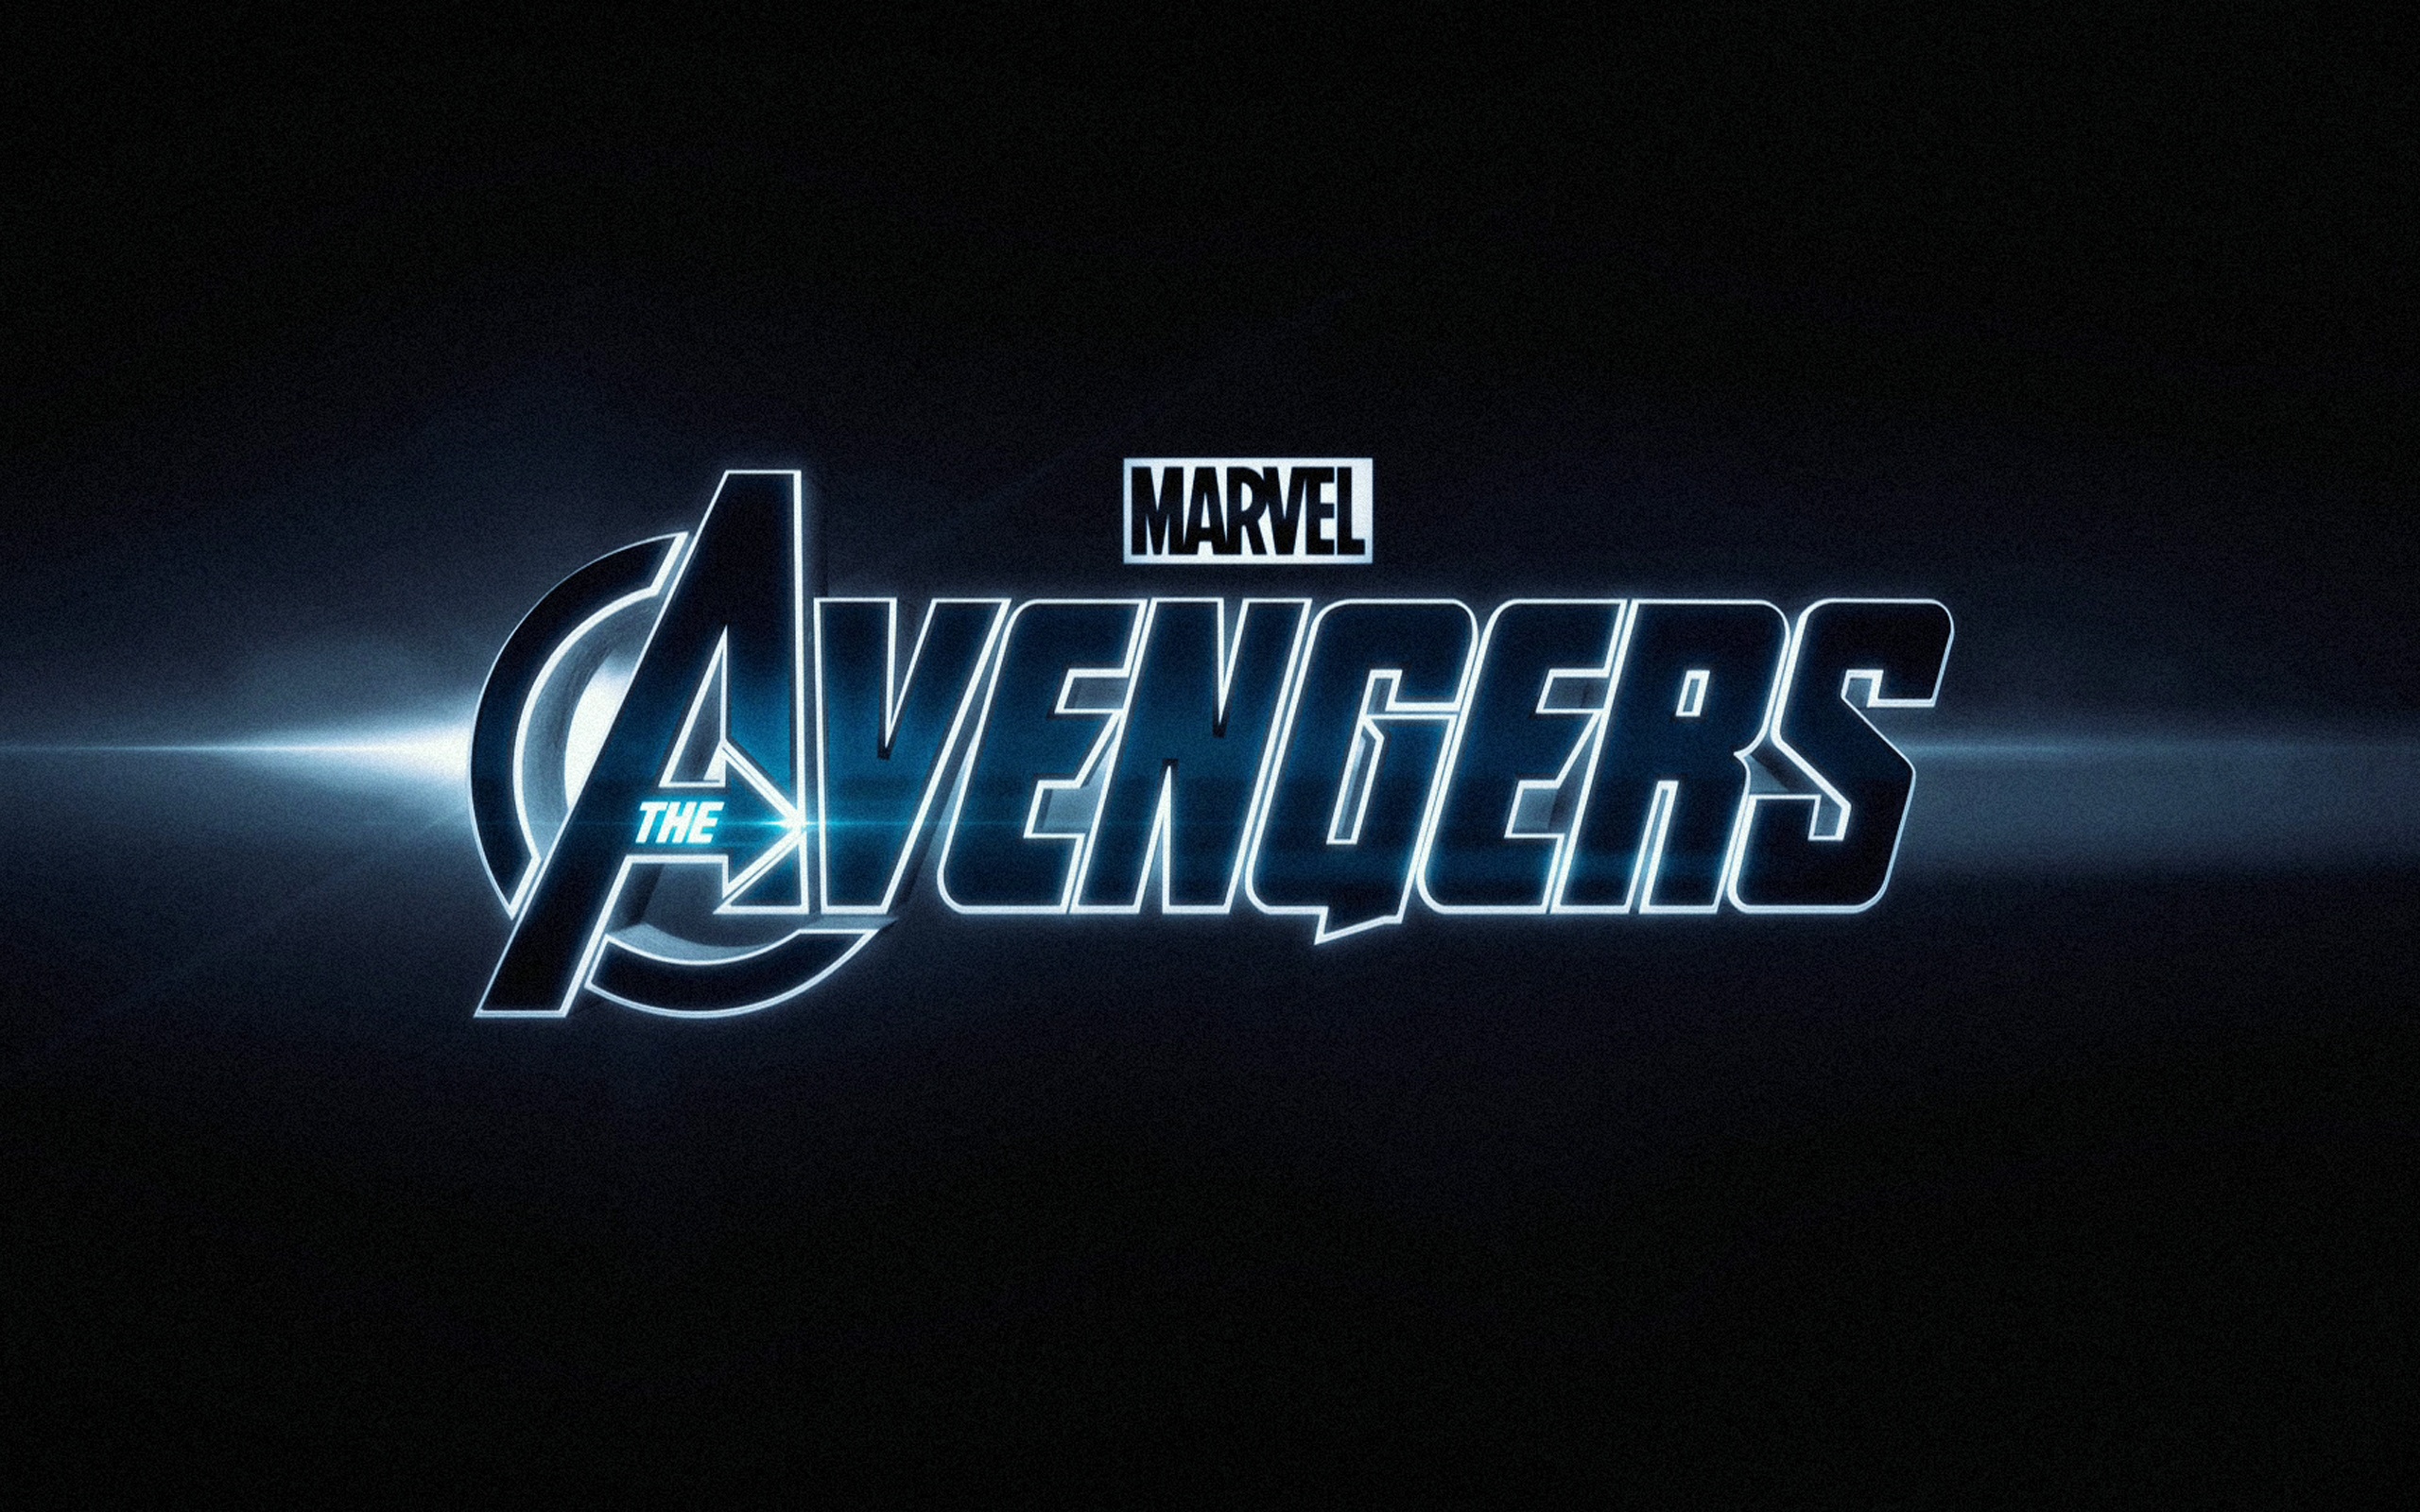 The Avengers Movie Logo Wallpapers   2560x1600   1361794 2560x1600